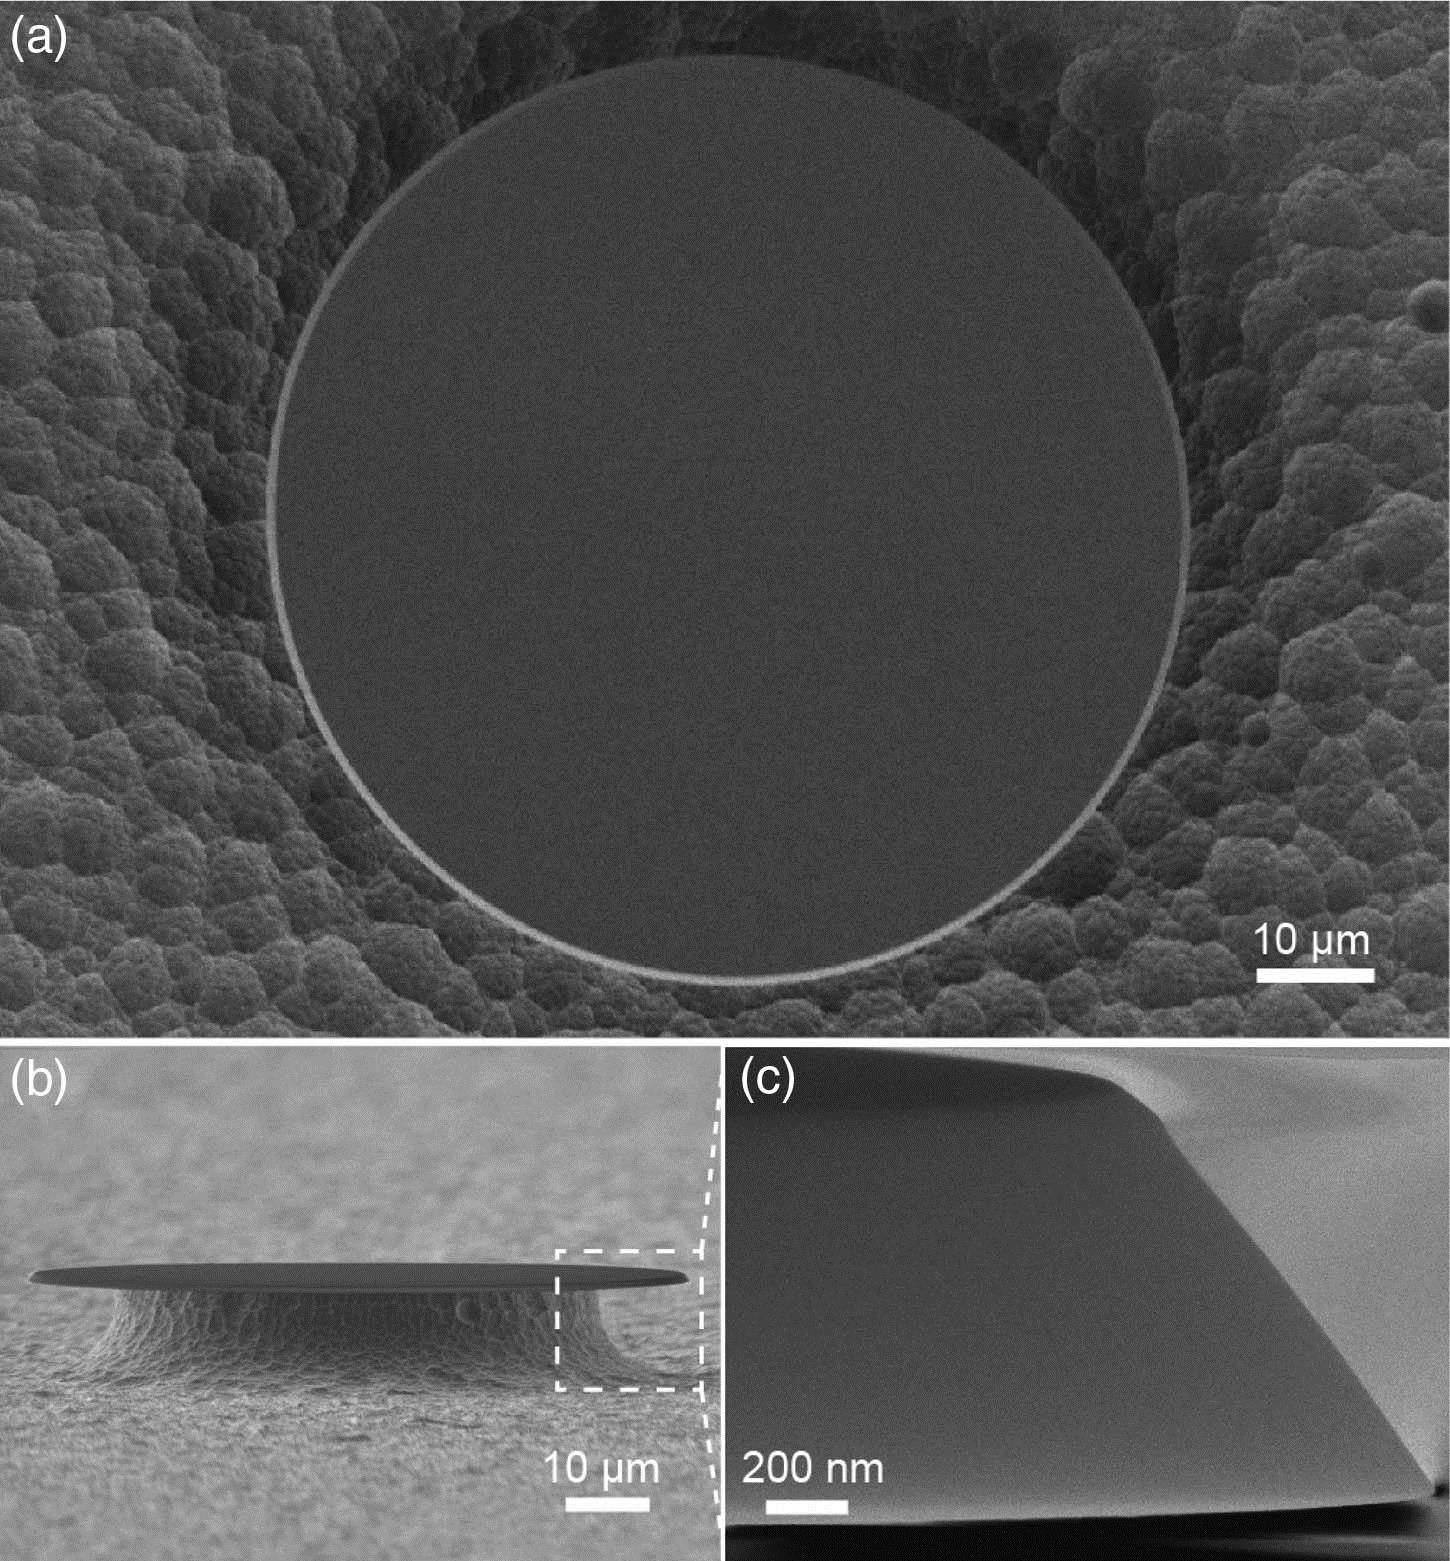 SEM images of the large-wedge-angle microdisk resonator used in our experiment. (a), (b) Full-scale view of the microresonator. (c) Close-up of the microresonator to show the detailed characteristics of the large wedge angle.